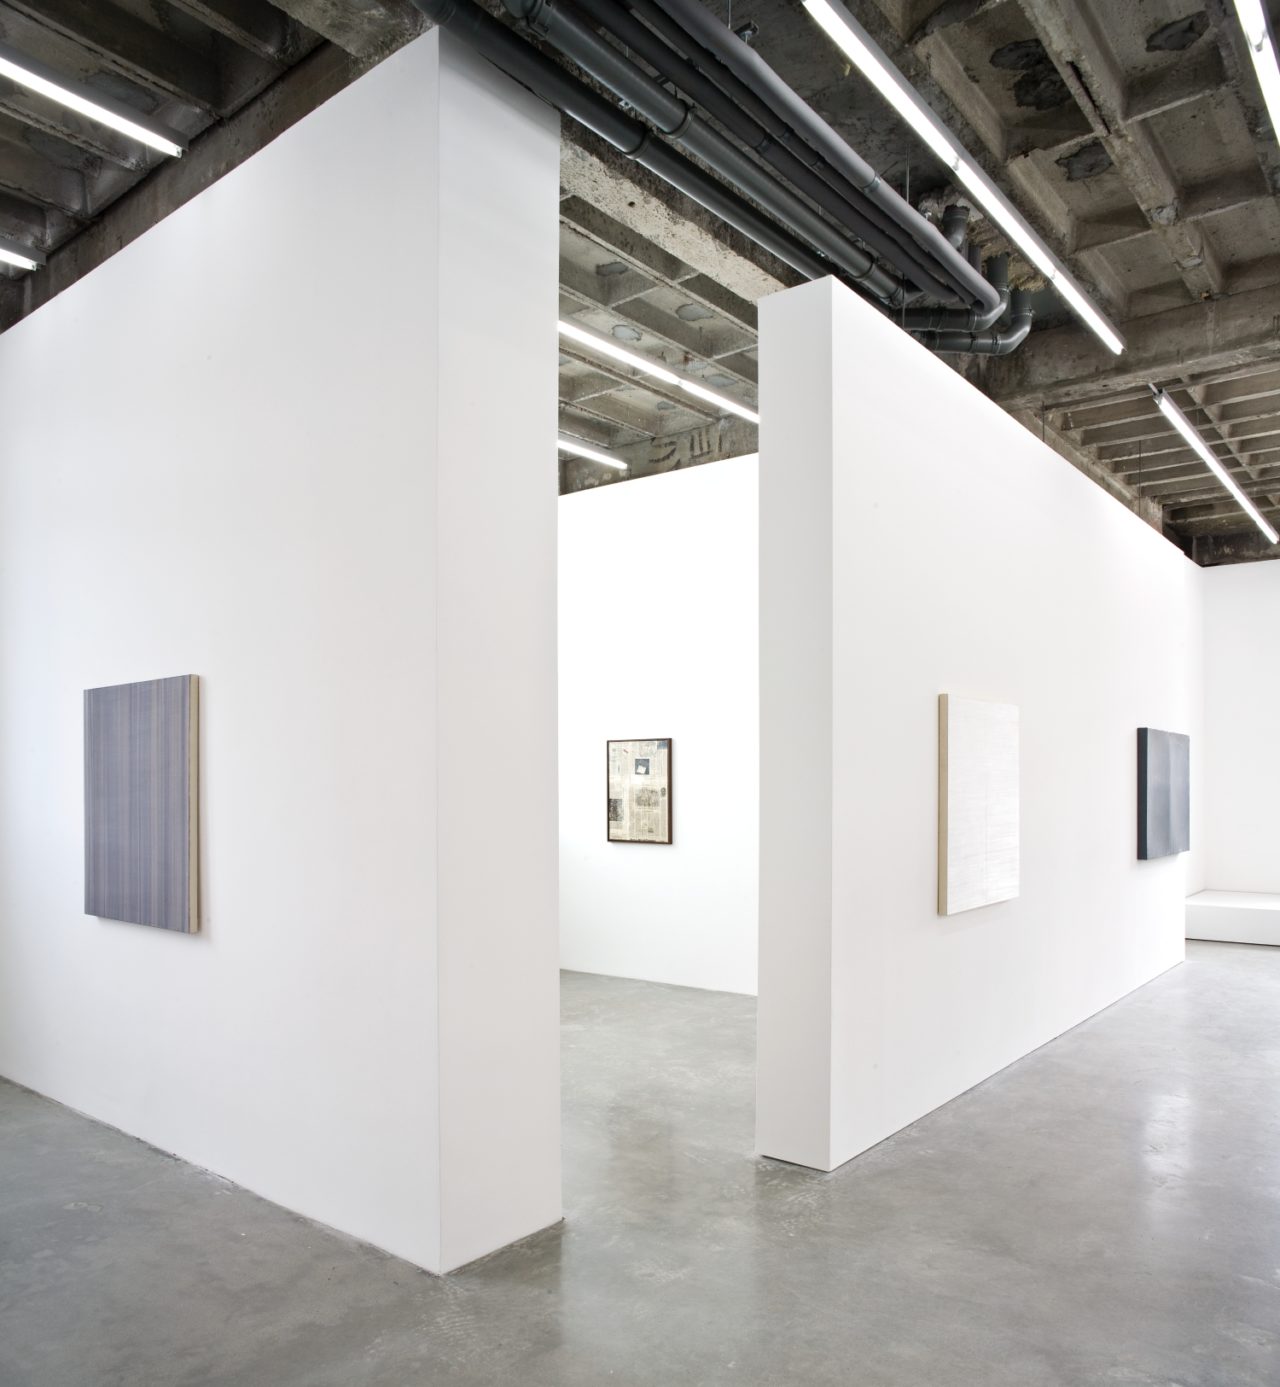 Monochrome reflections, Installation view